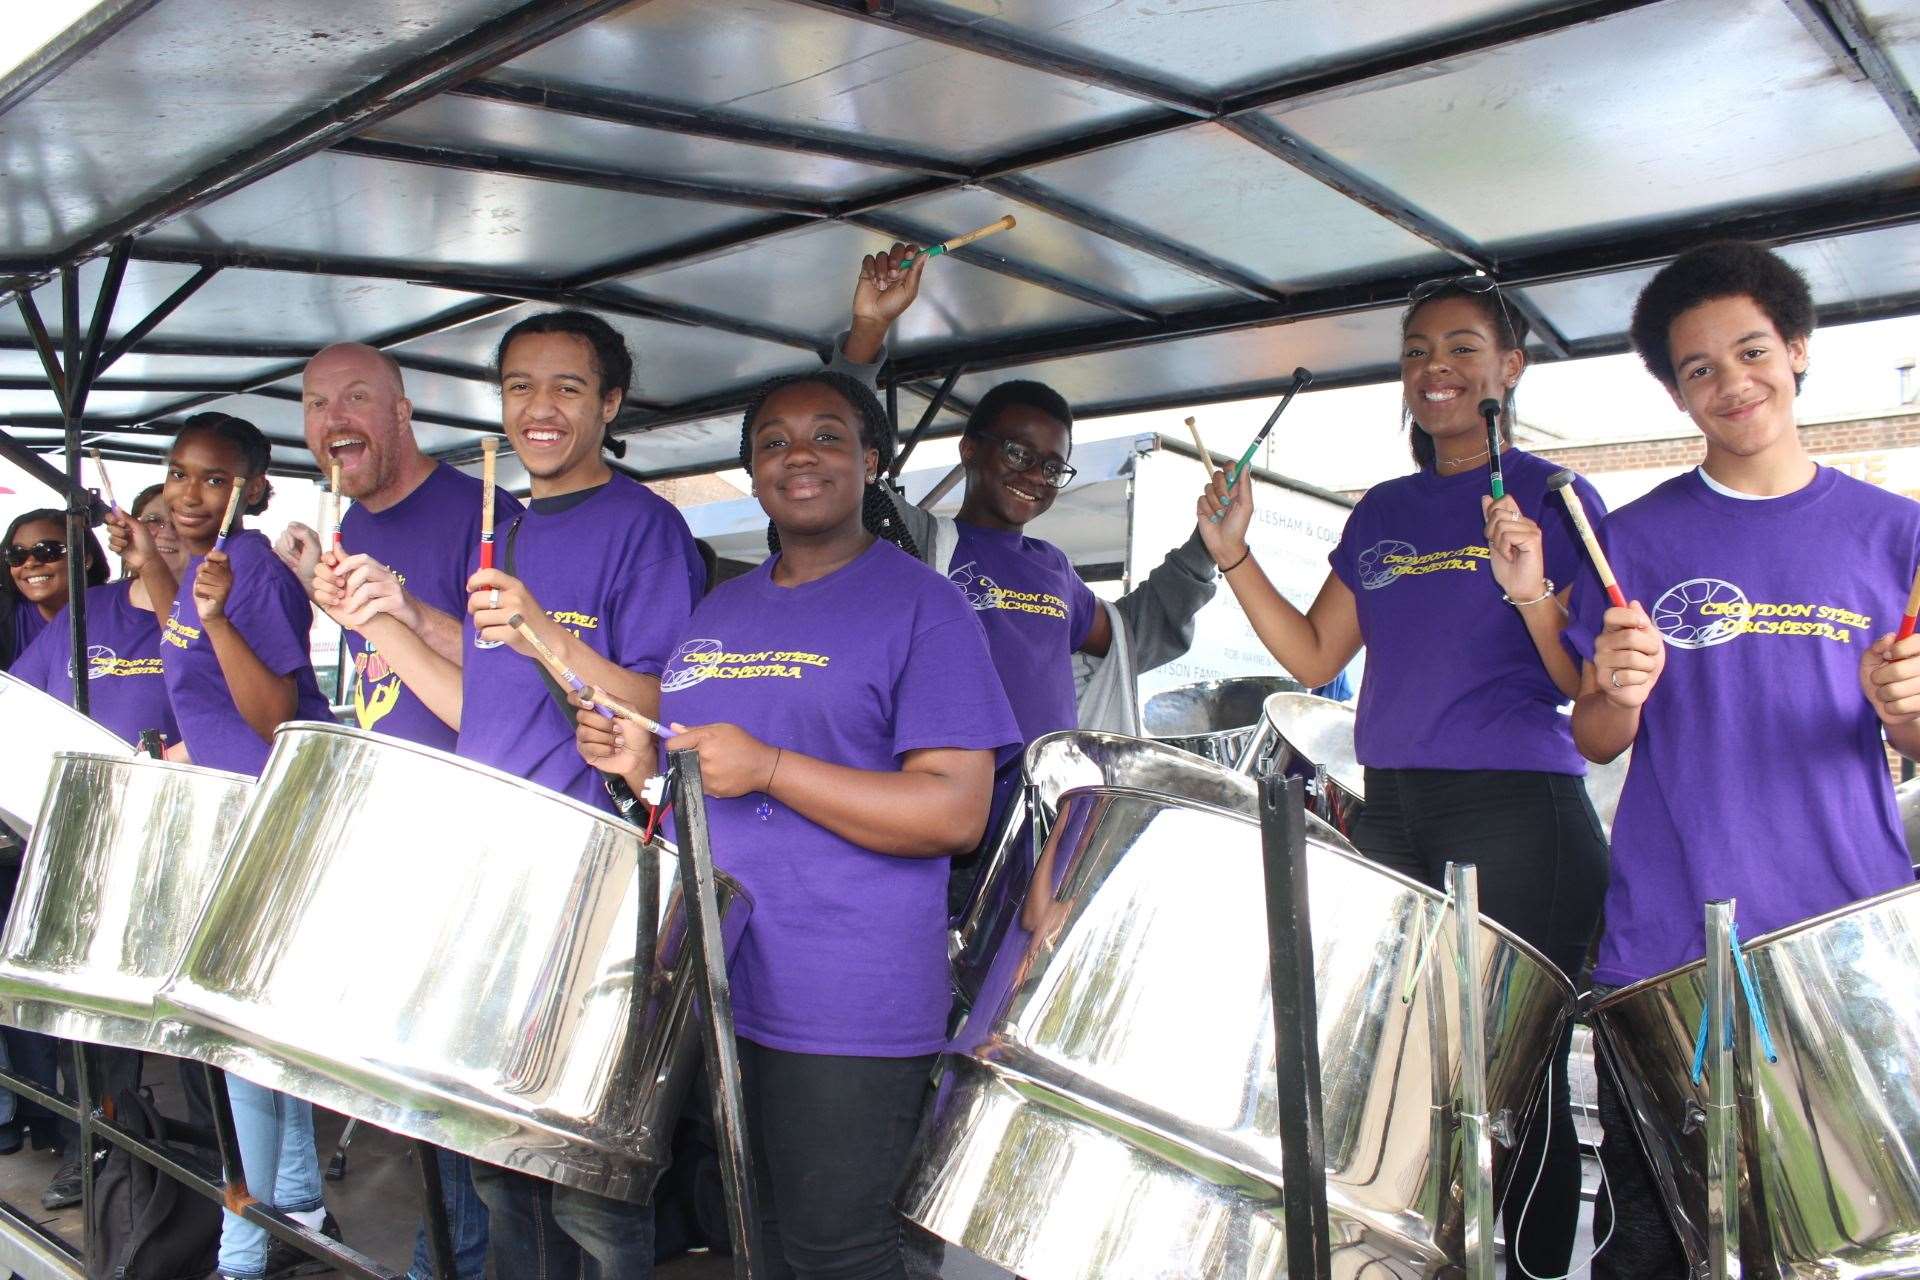 Croydon Steel Band is making a return to the Sheppey Carnival